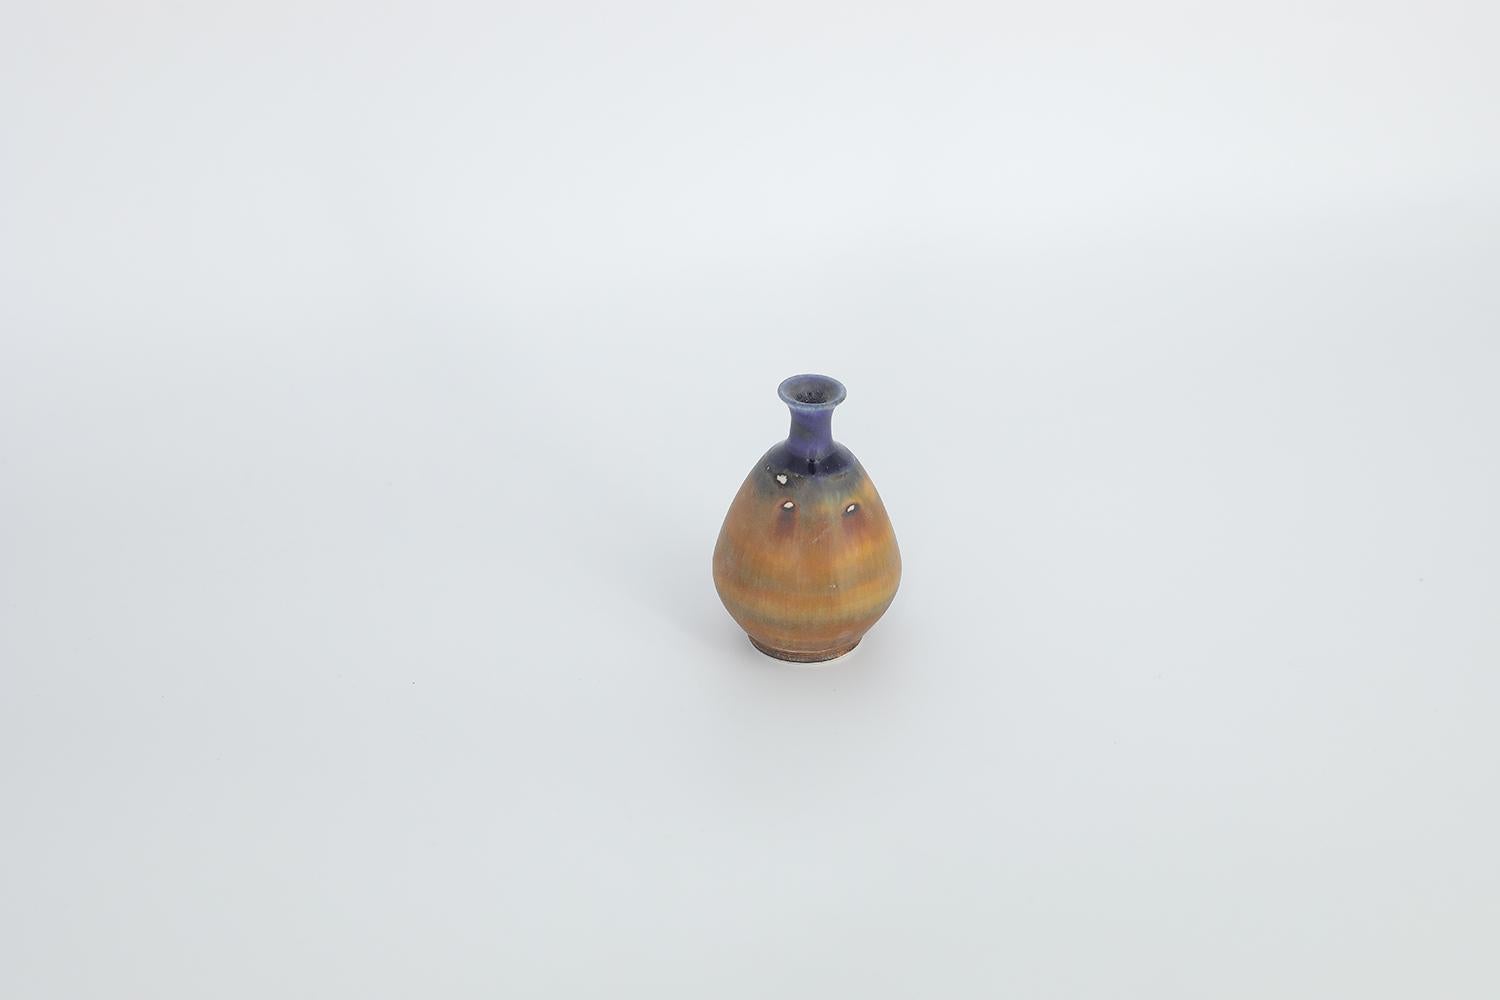 This miniature, collectible stoneware vase was designed by Gunnar Borg for the Swedish manufacture Höganäs Keramik during the 1960s. Handmade by a Master, with the utmost care and attention to details. The vase is dyed in blue and brown, in an